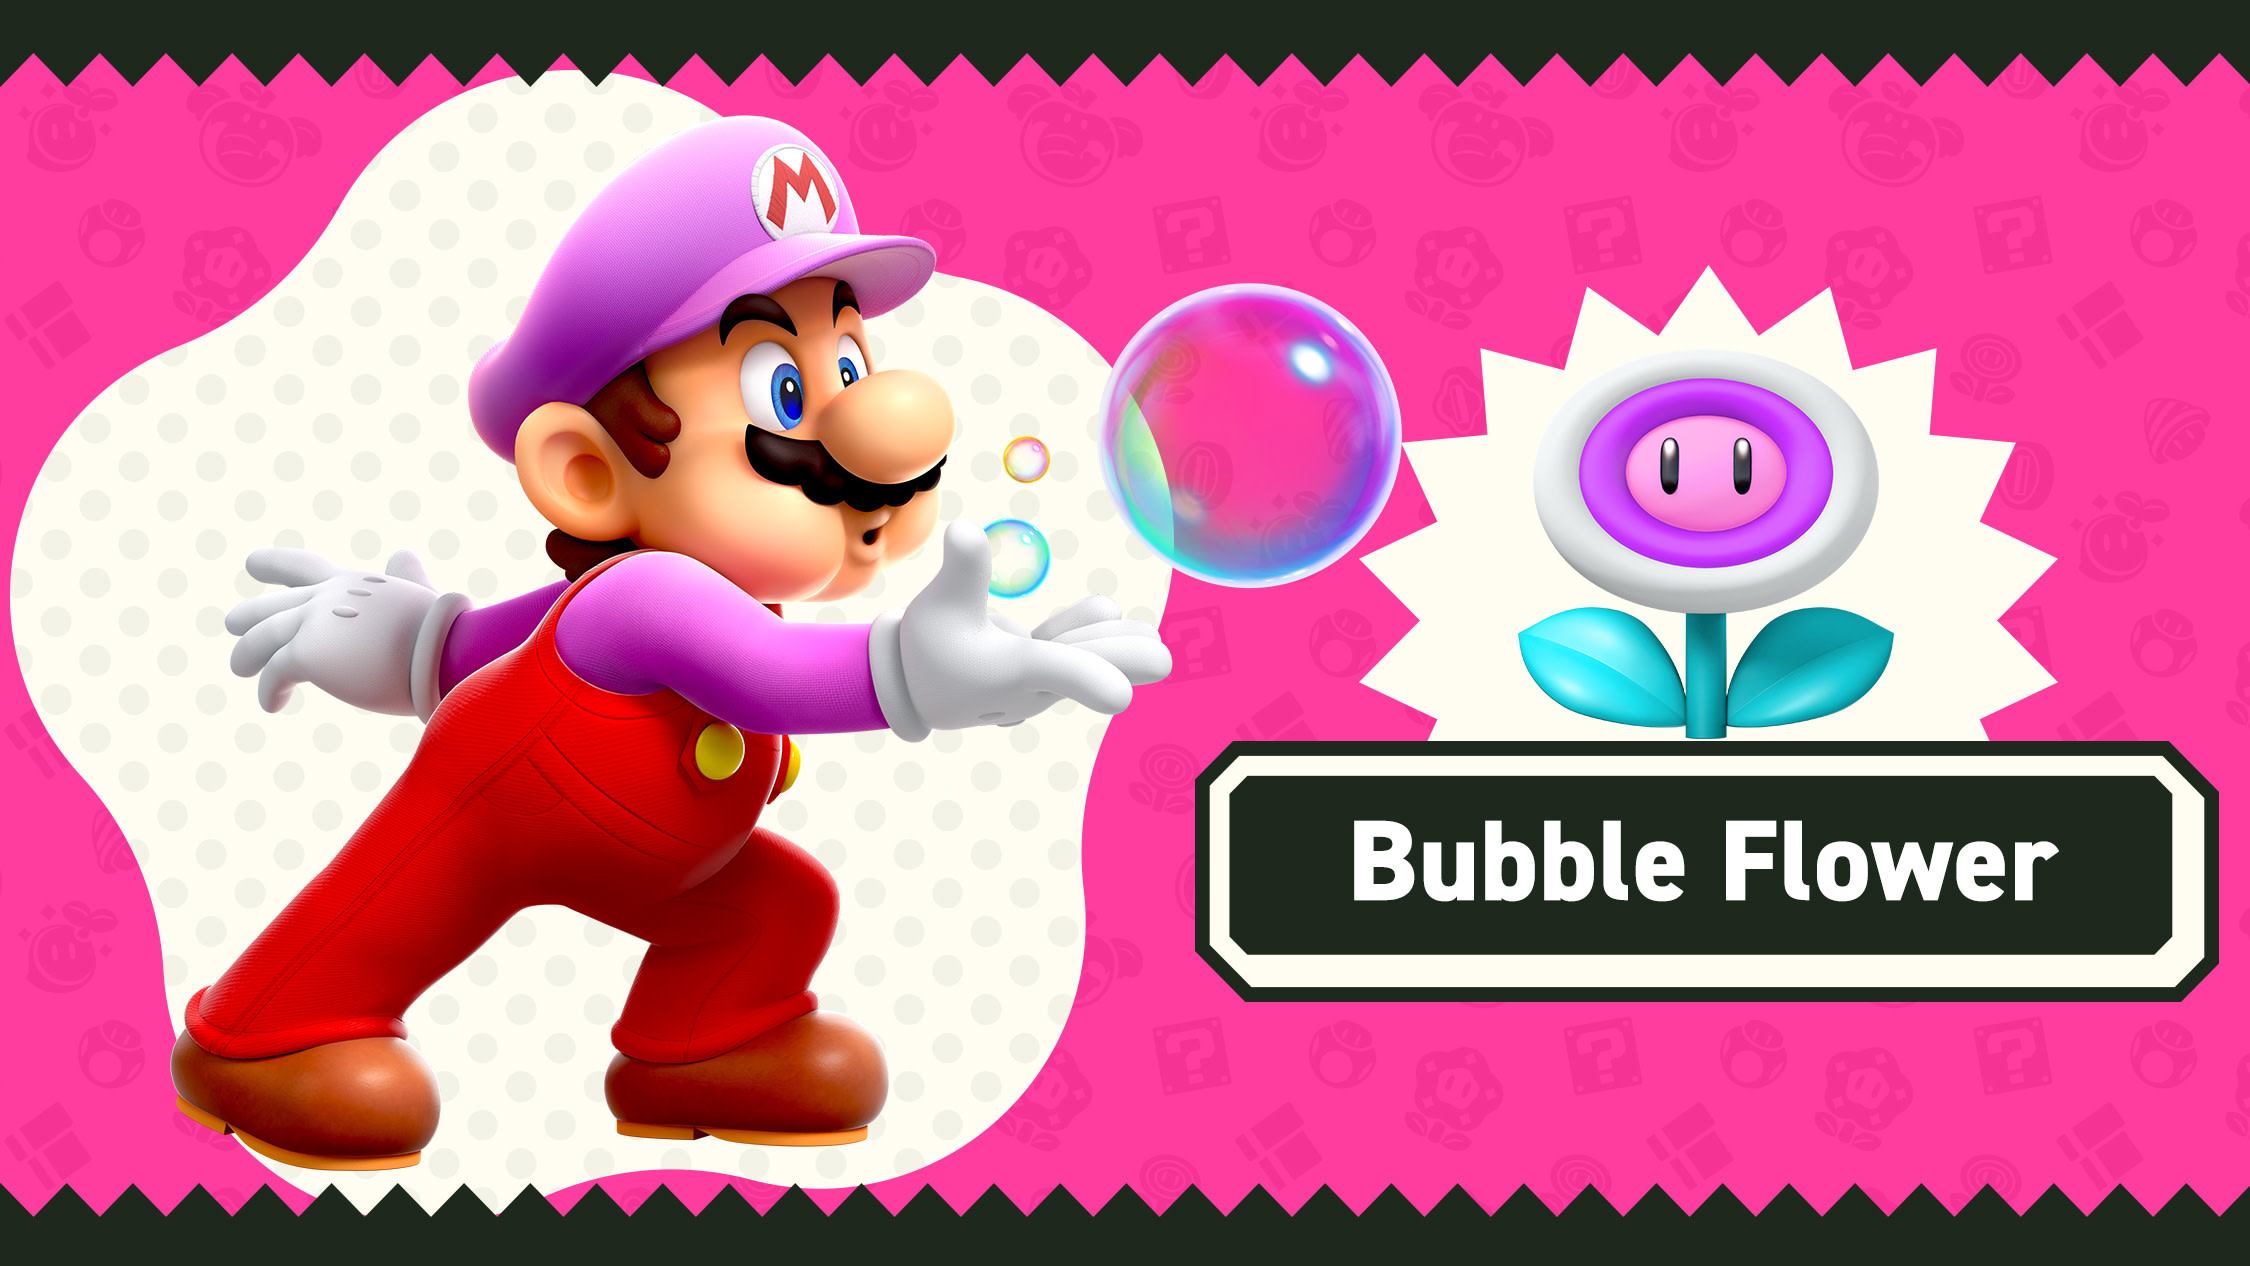 Get a jump on Super Mario Bros. Wonder with these powerful power-ups - Bubble